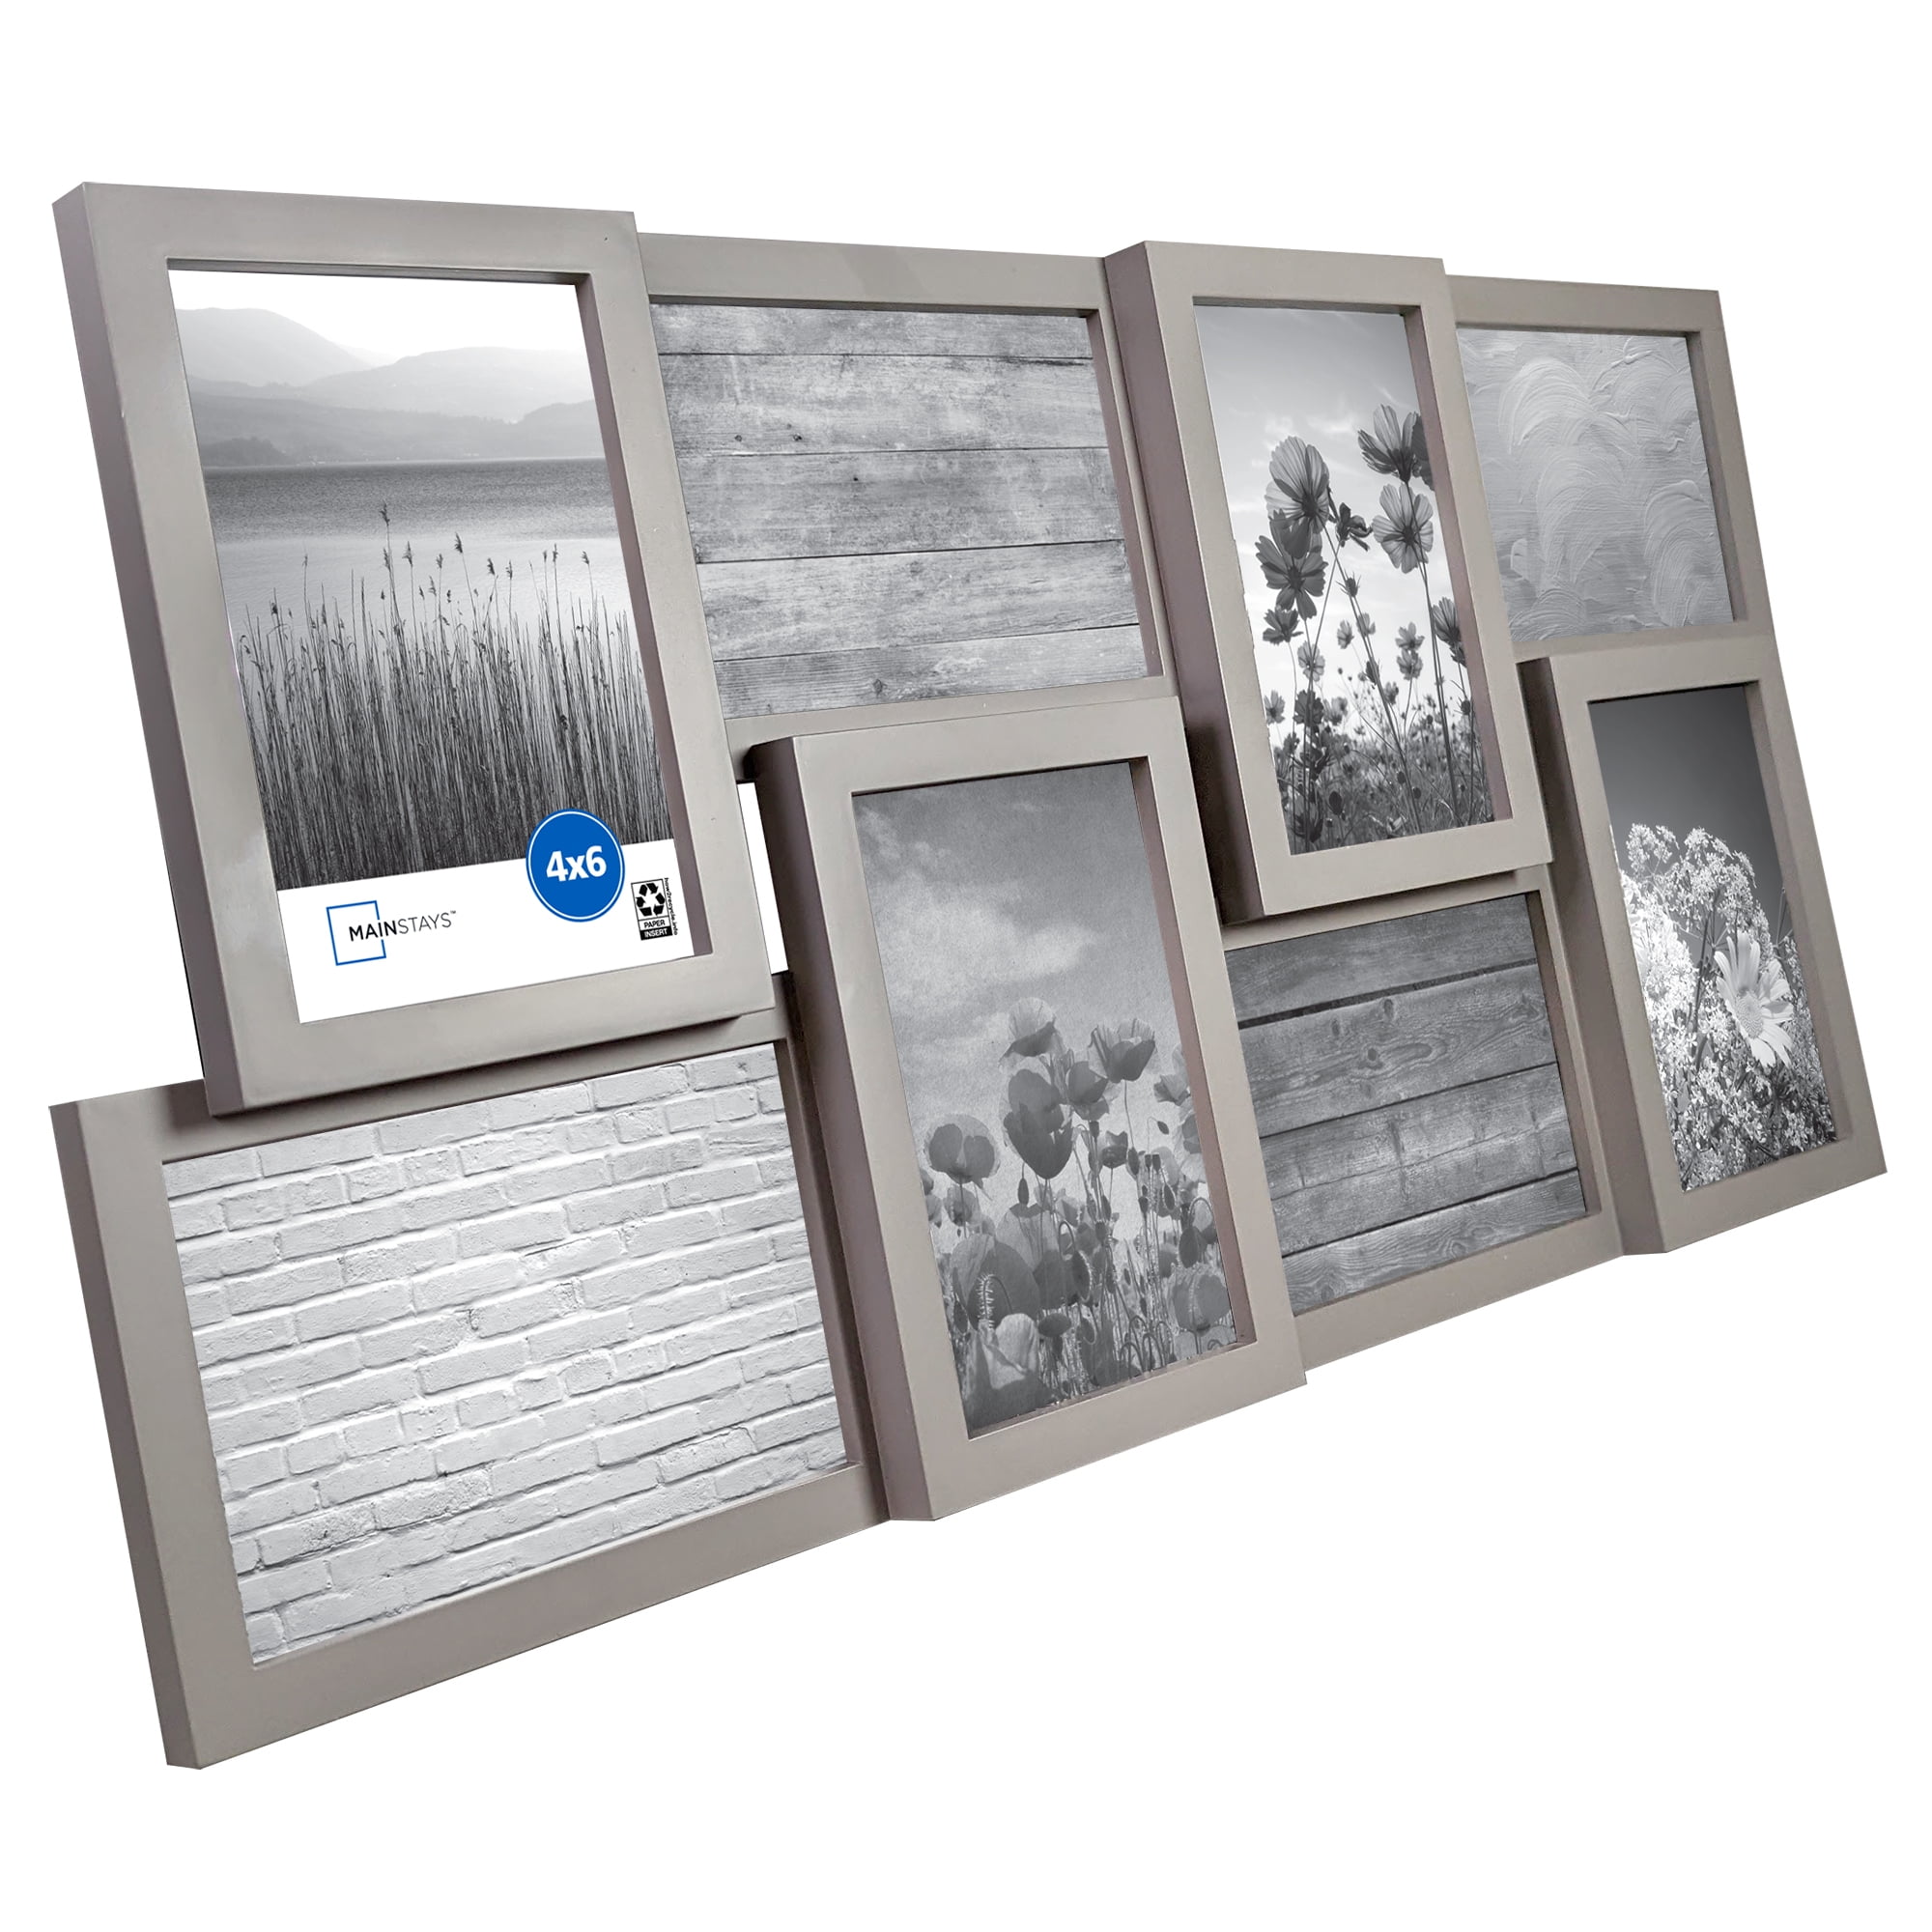 Mainstays 4x6 8-Opening Linear Gallery Collage Picture Frame